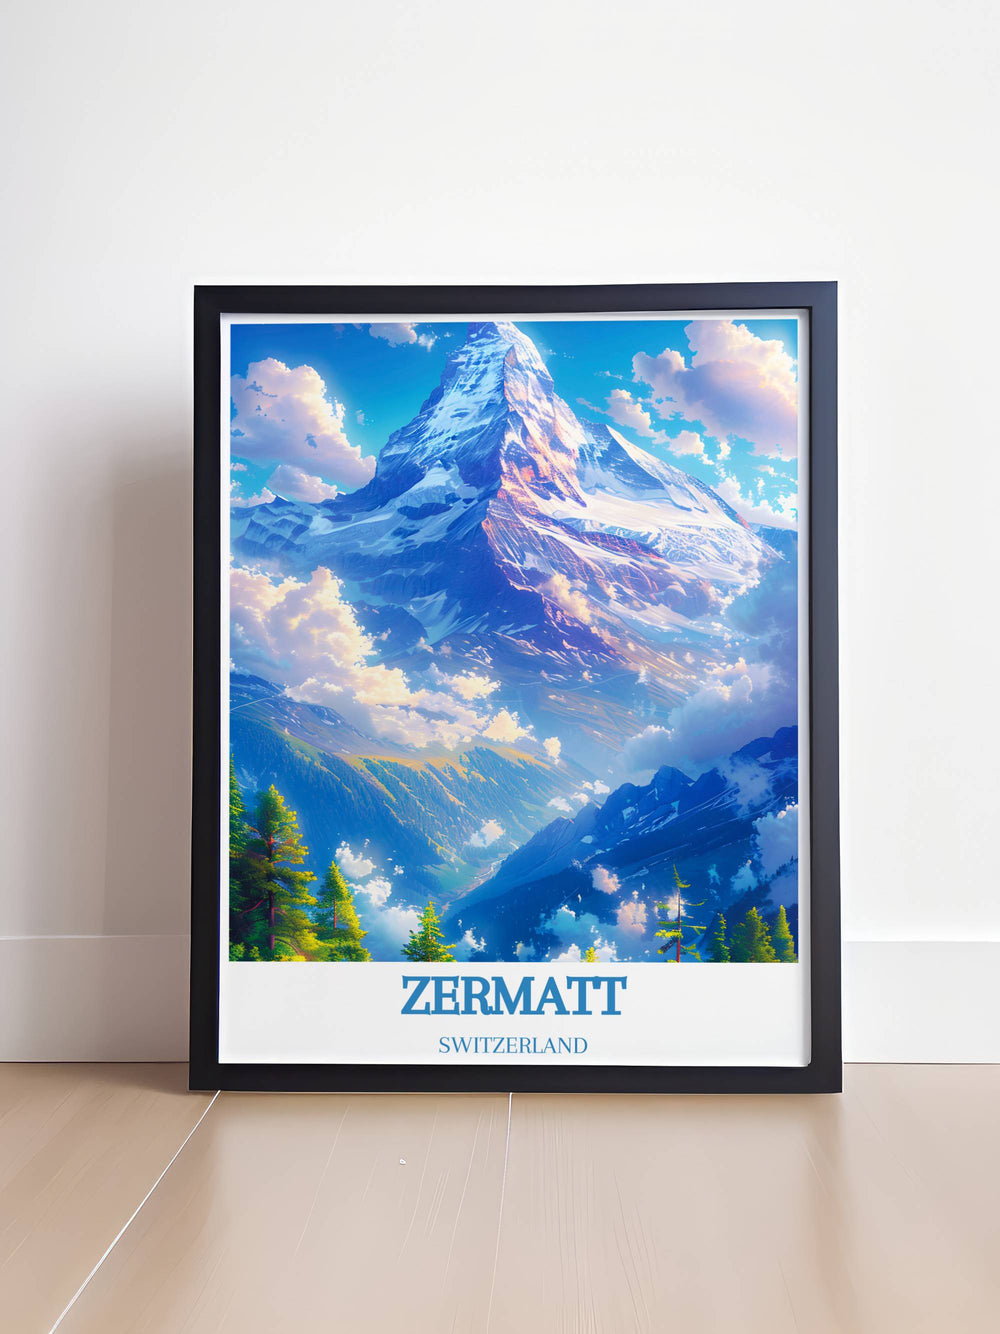 Detailed vintage art print of Zermatt Ski Resort, showcasing the iconic Matterhorn with a retro travel poster aesthetic, ideal for lovers of classic and elegant decor.